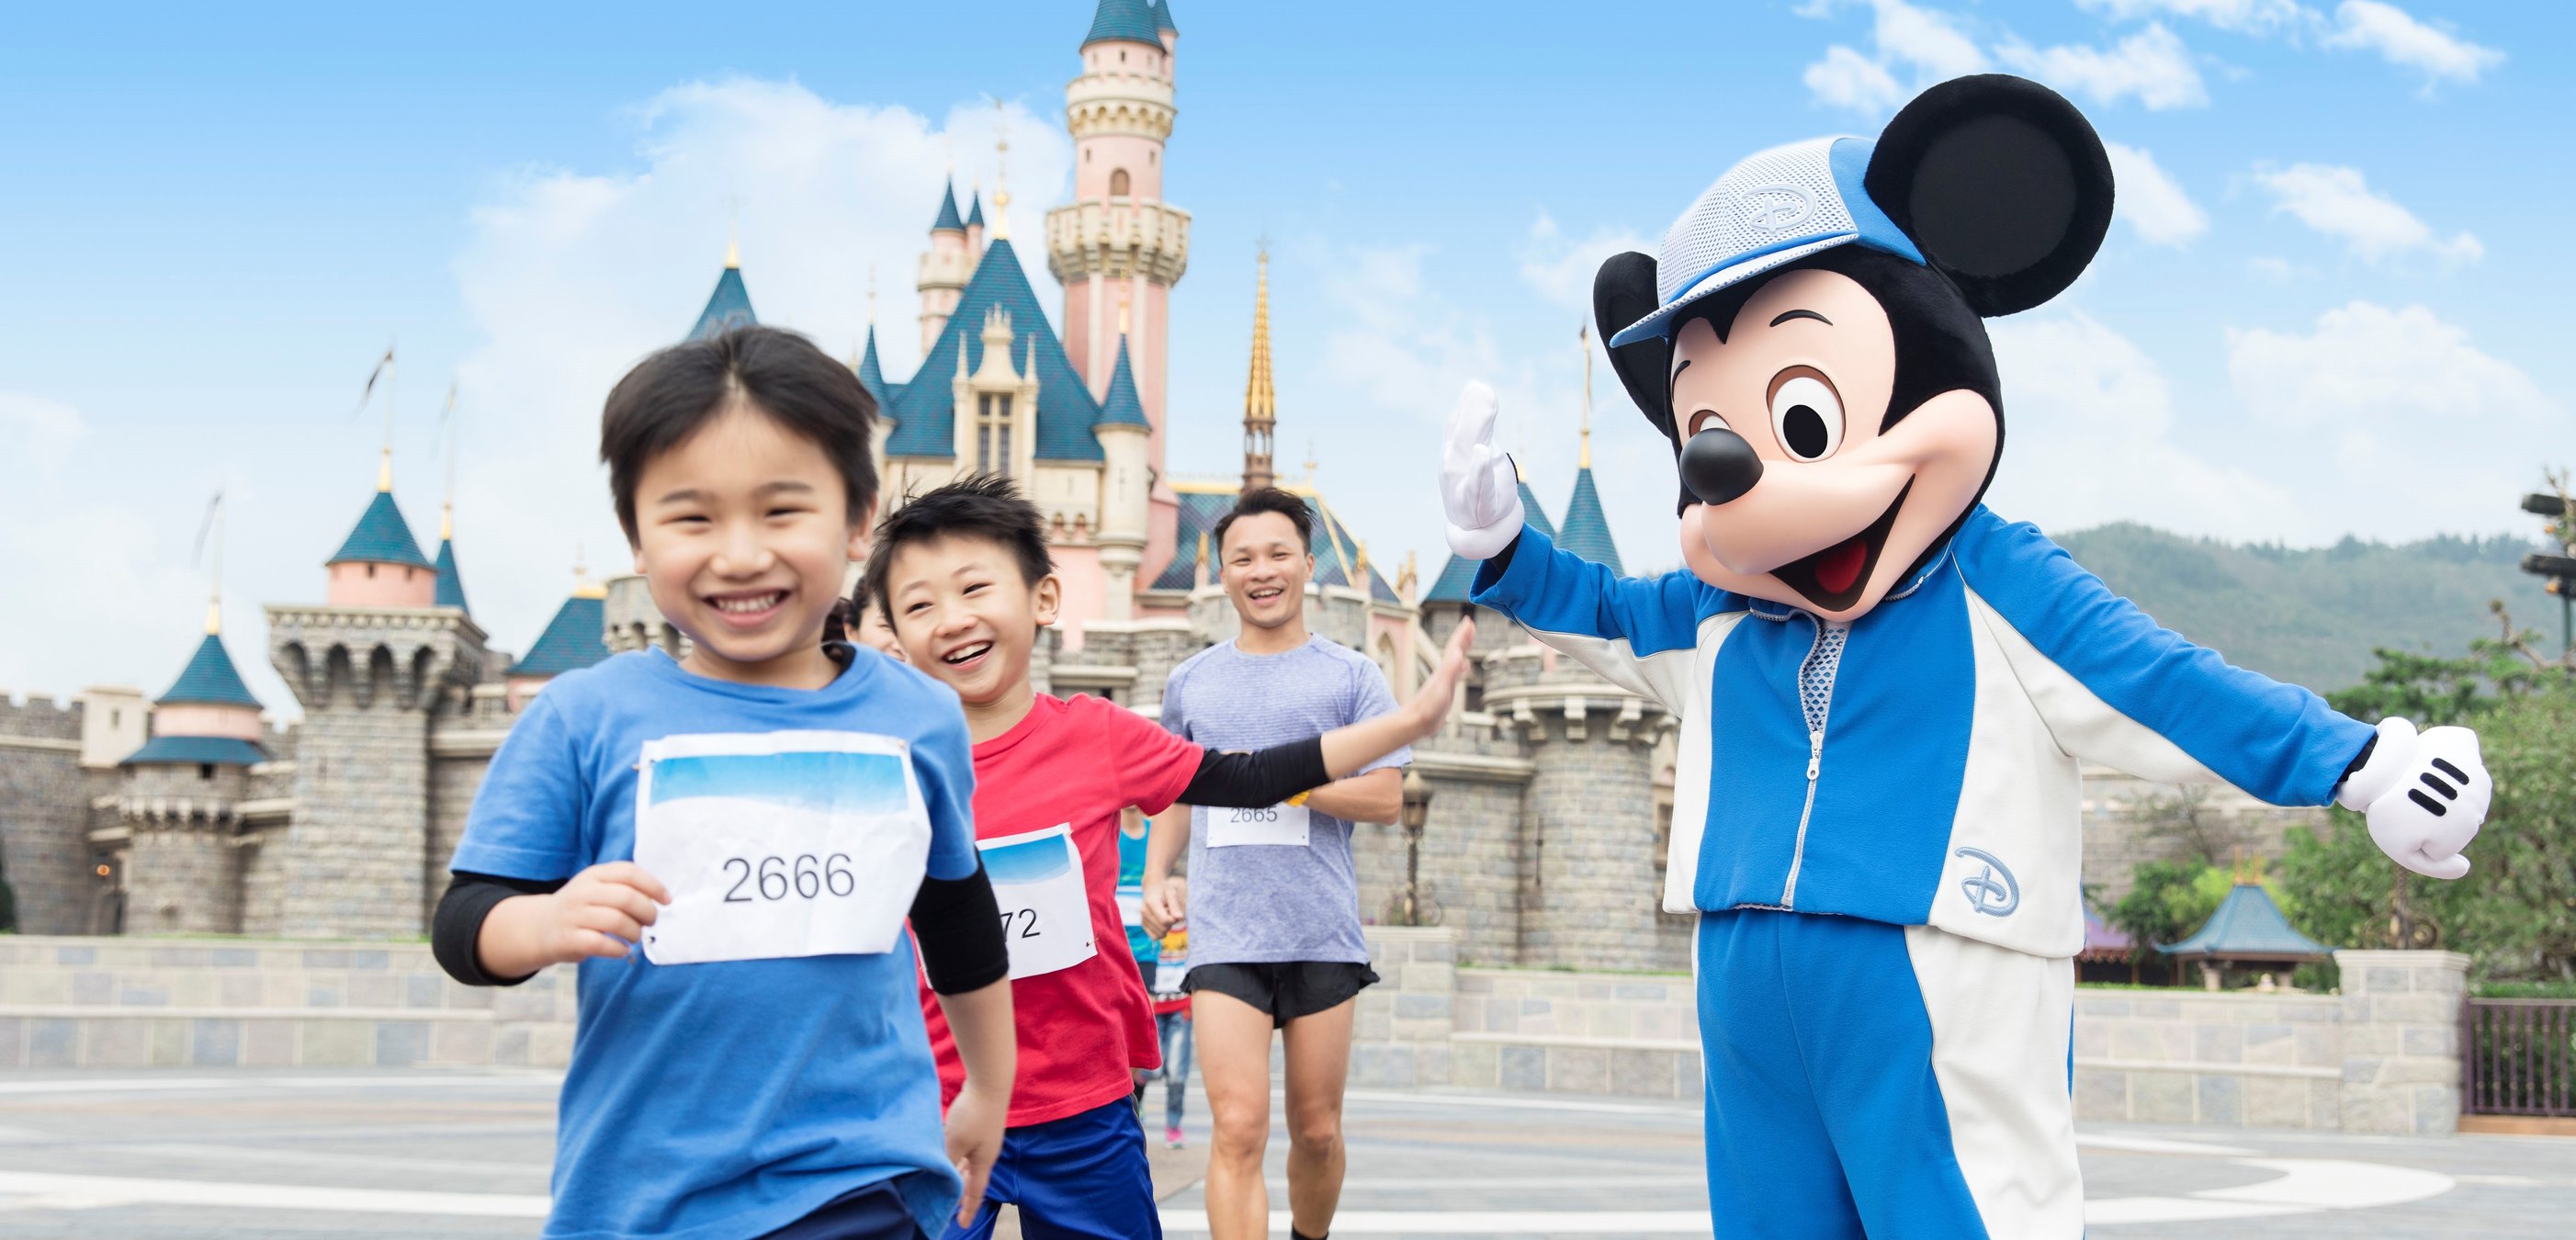 Disney friends to cheer on runners